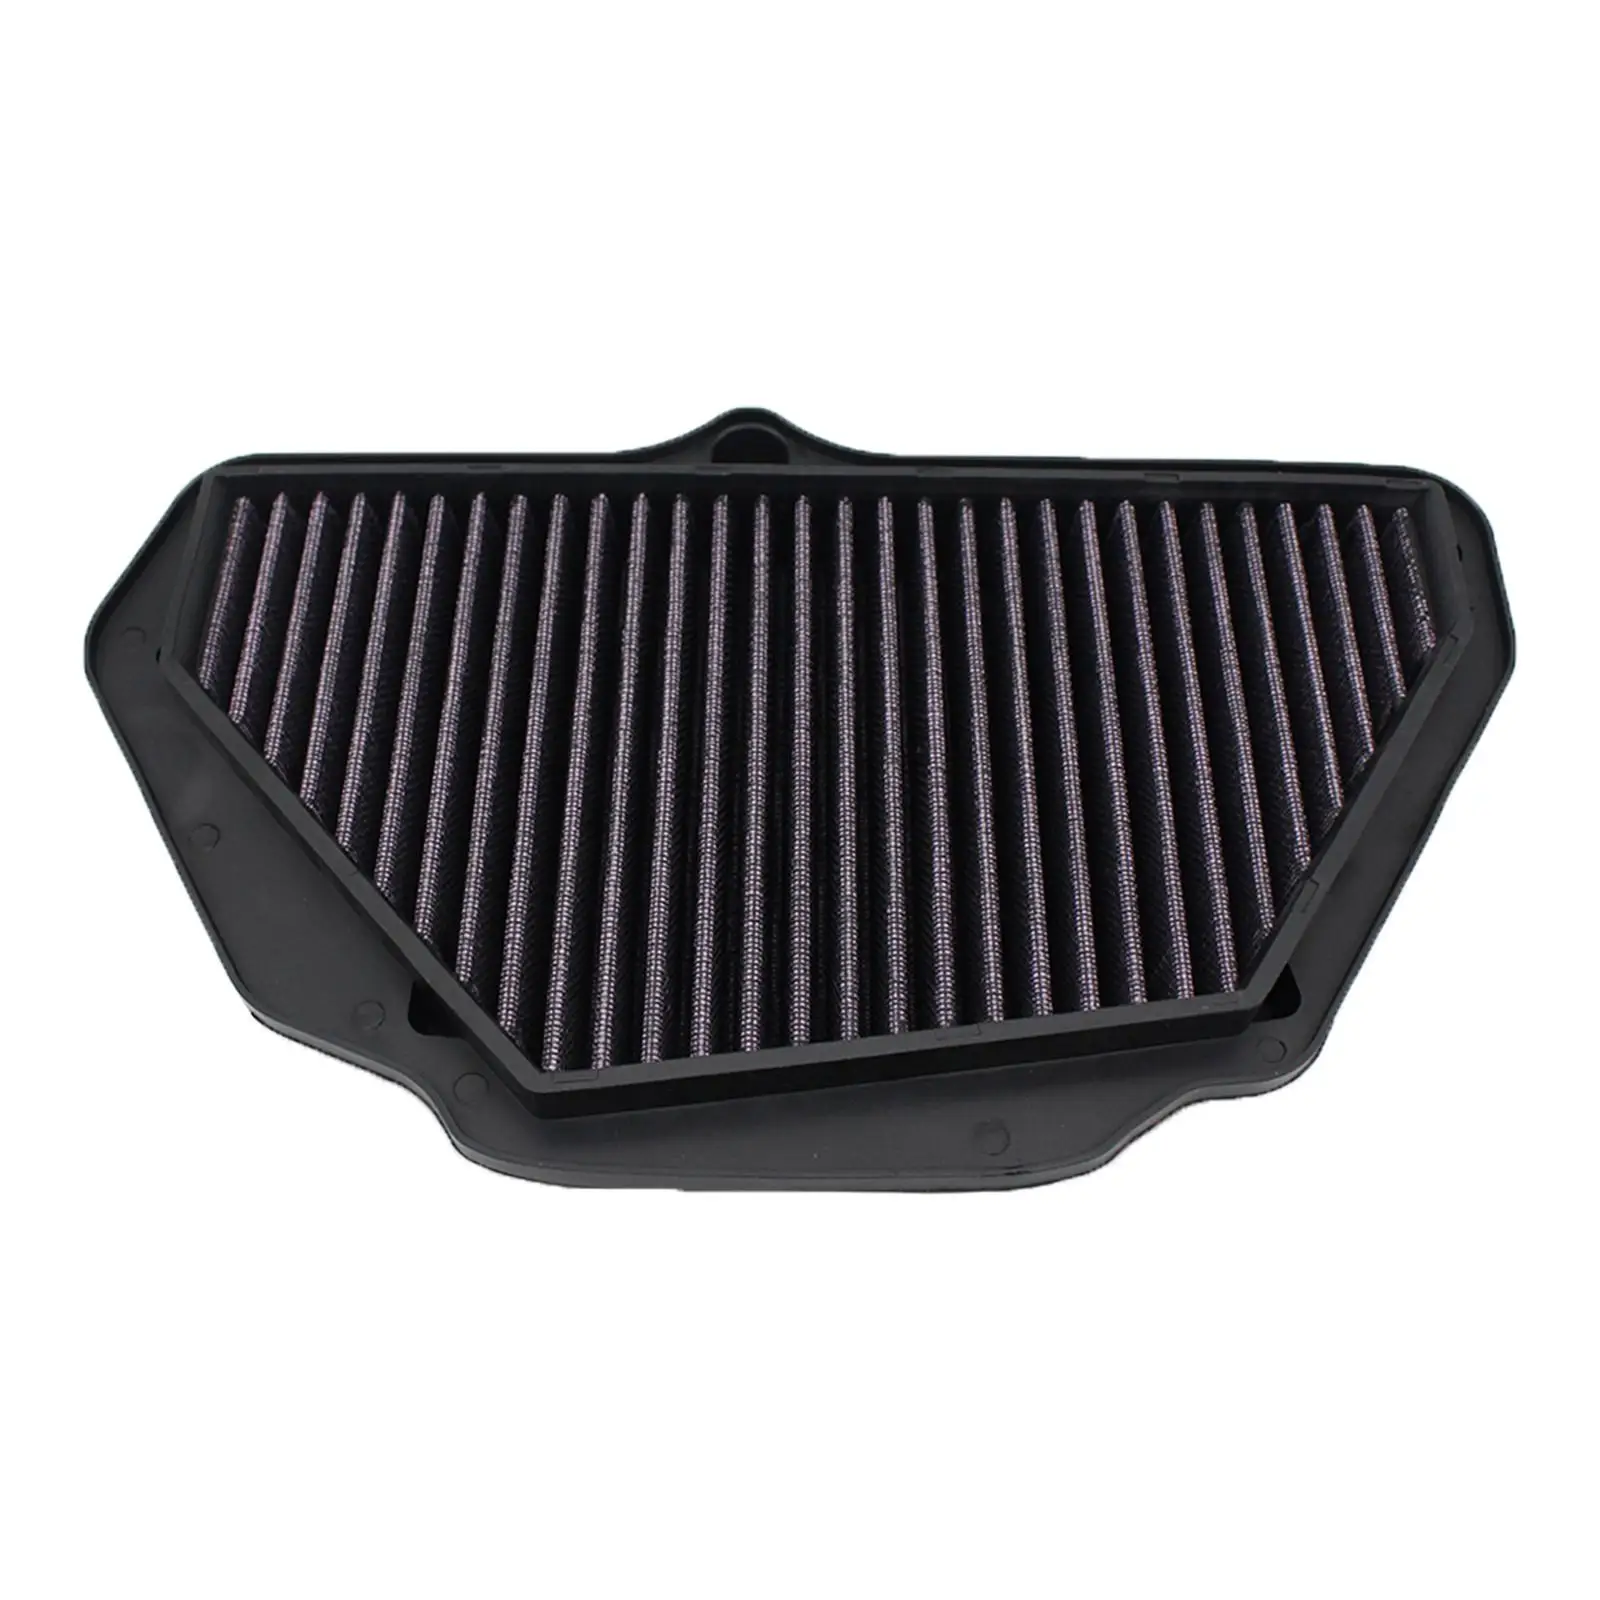 Motorbike Air Filter Intake Modification Assembly Performance Upgrade Motorcycle